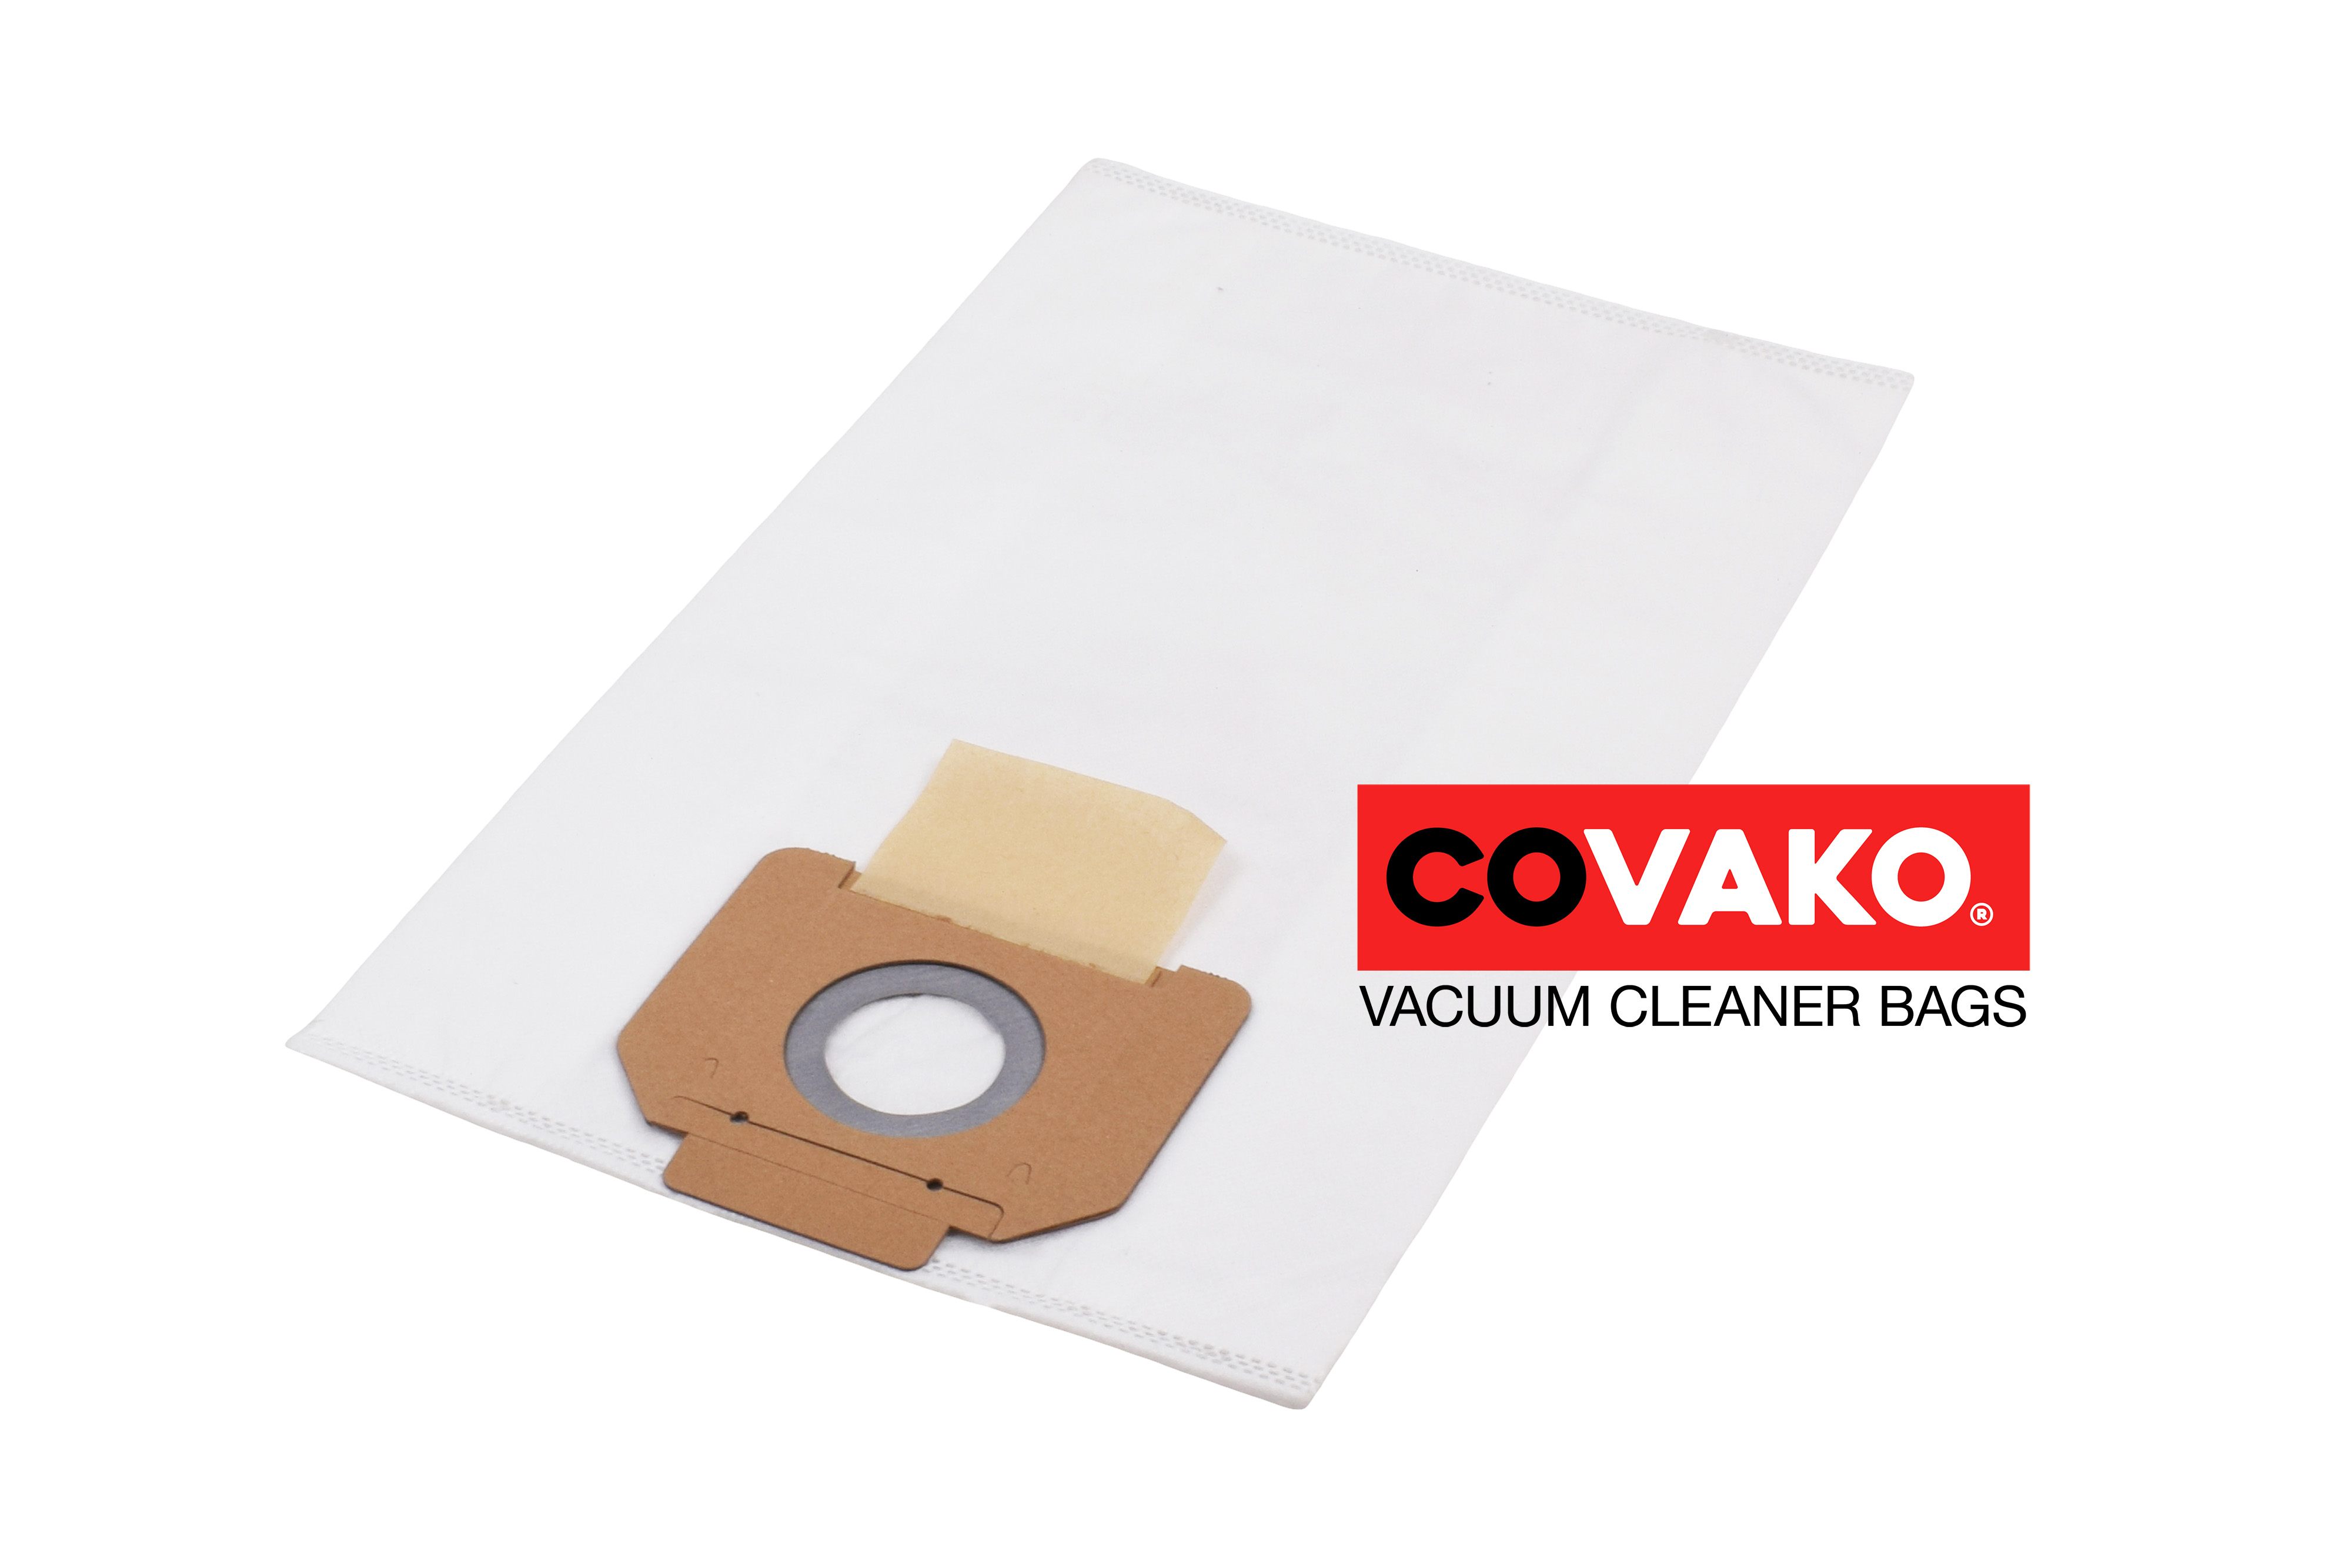 Gansow GP 1/16 Eco A / Synthesis - Gansow vacuum cleaner bags